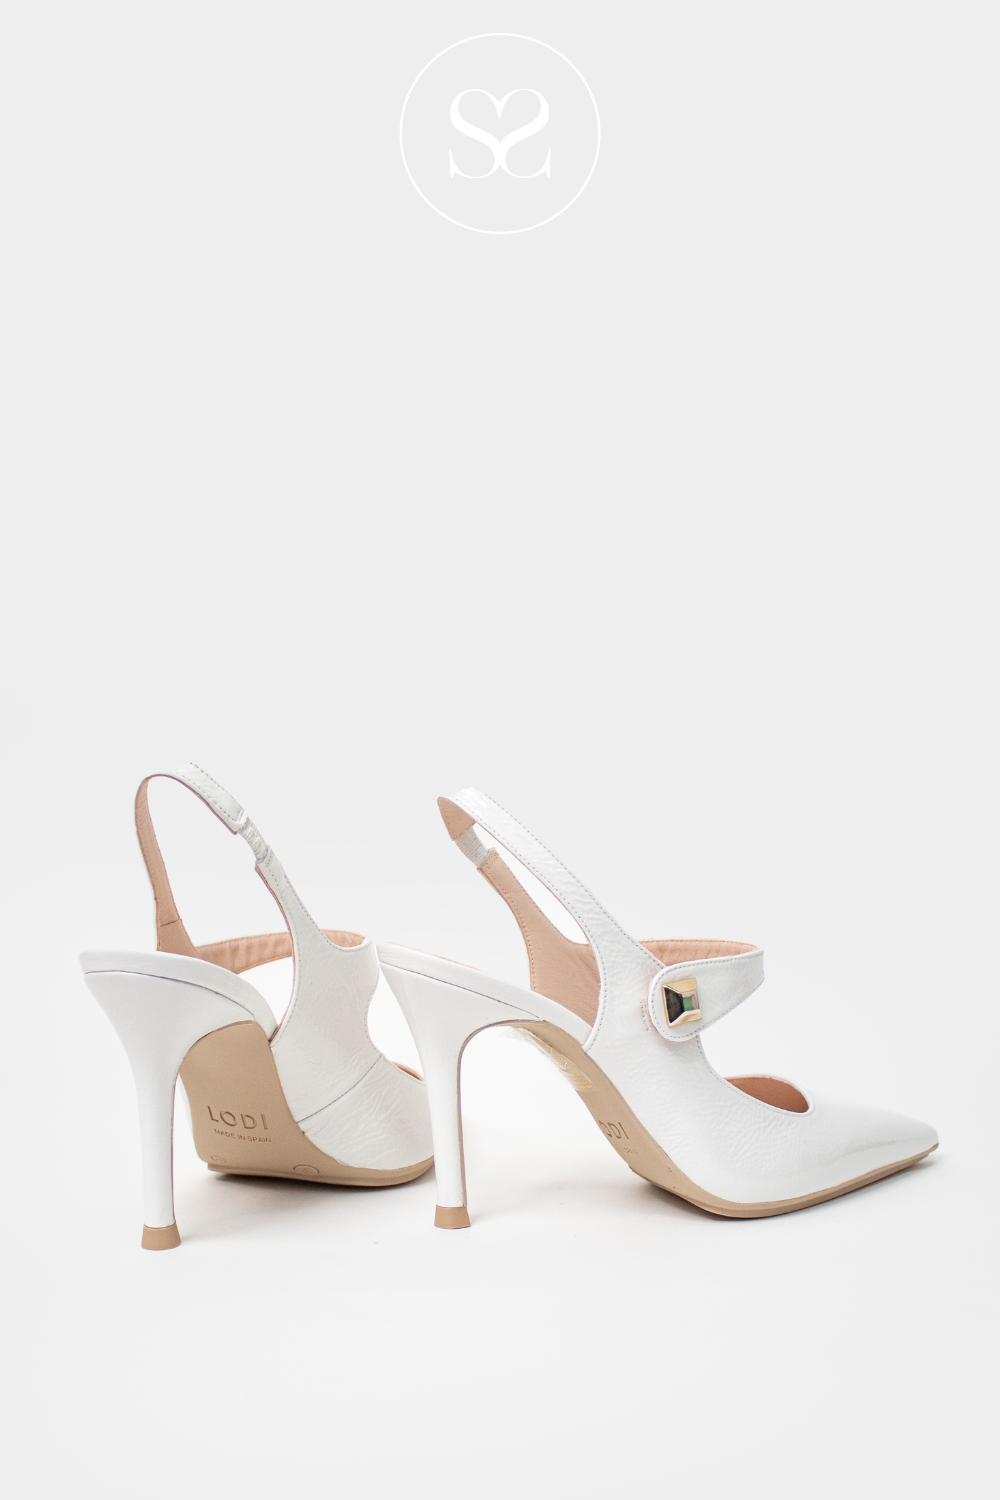 LODI SALEN WHITE PATENT POINTED TOE SLINGBACK HIGH HEEL WITH STRAP ACROSS FOOT